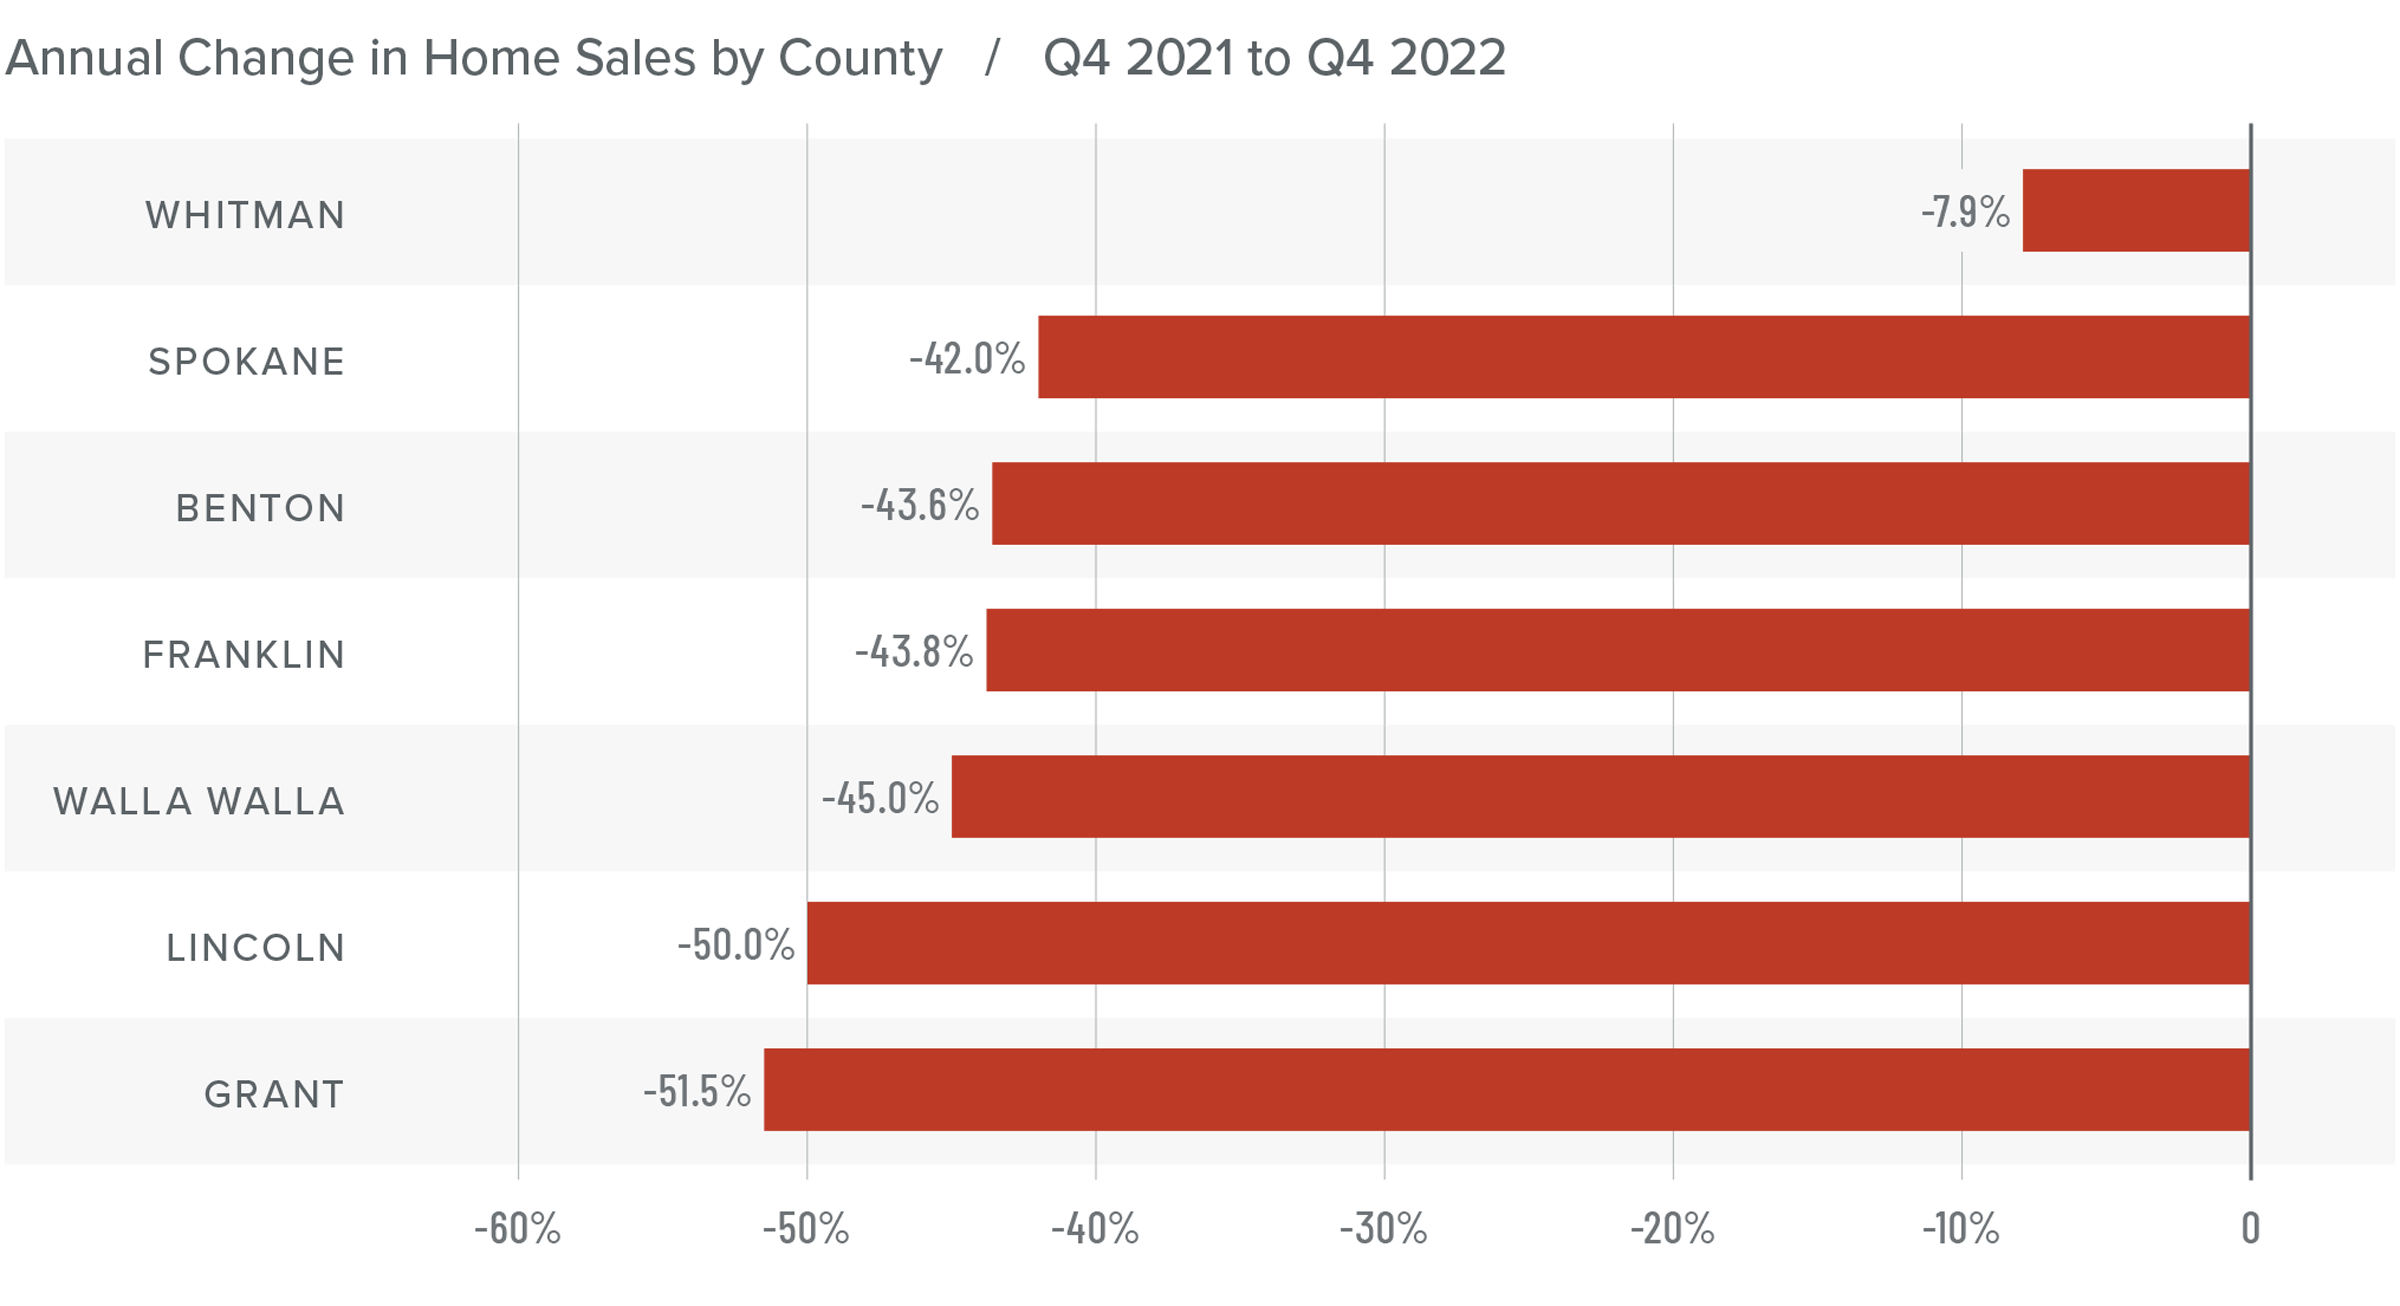 A bar graph showing the annual change in home sales for various counties in Eastern Washington from Q4 2021 to Q4 2022. All counties have a negative percentage year-over-year change. Here are the totals: Whitman at -7.9%, Spokane at -42%, Benton -43.6%, Franklin -43.8%, Walla Walla at -45%, Lincoln at -50%, and Grant -51.5%.